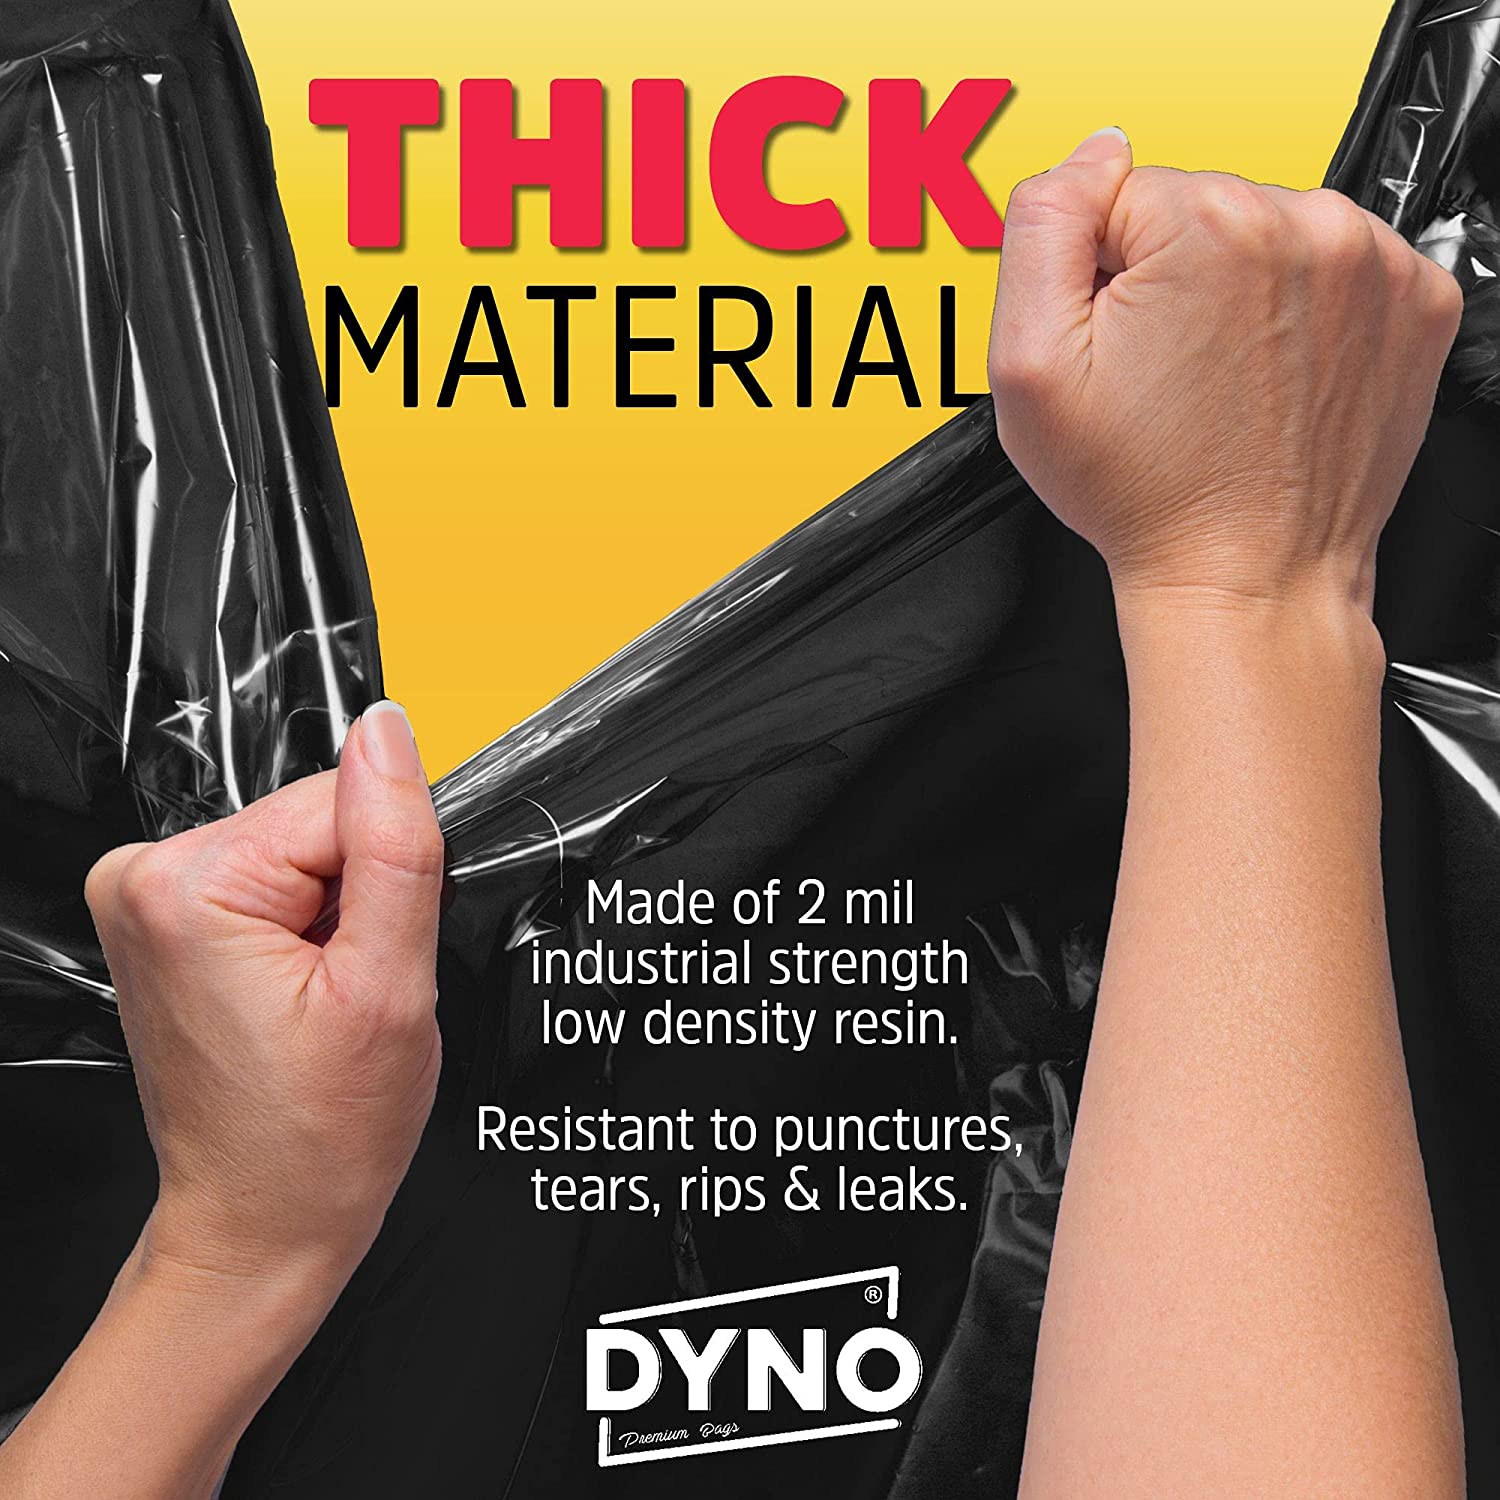 Dyno Products Online 95-Gallon, 2 Mil Thick Heavy-Duty Black Trash